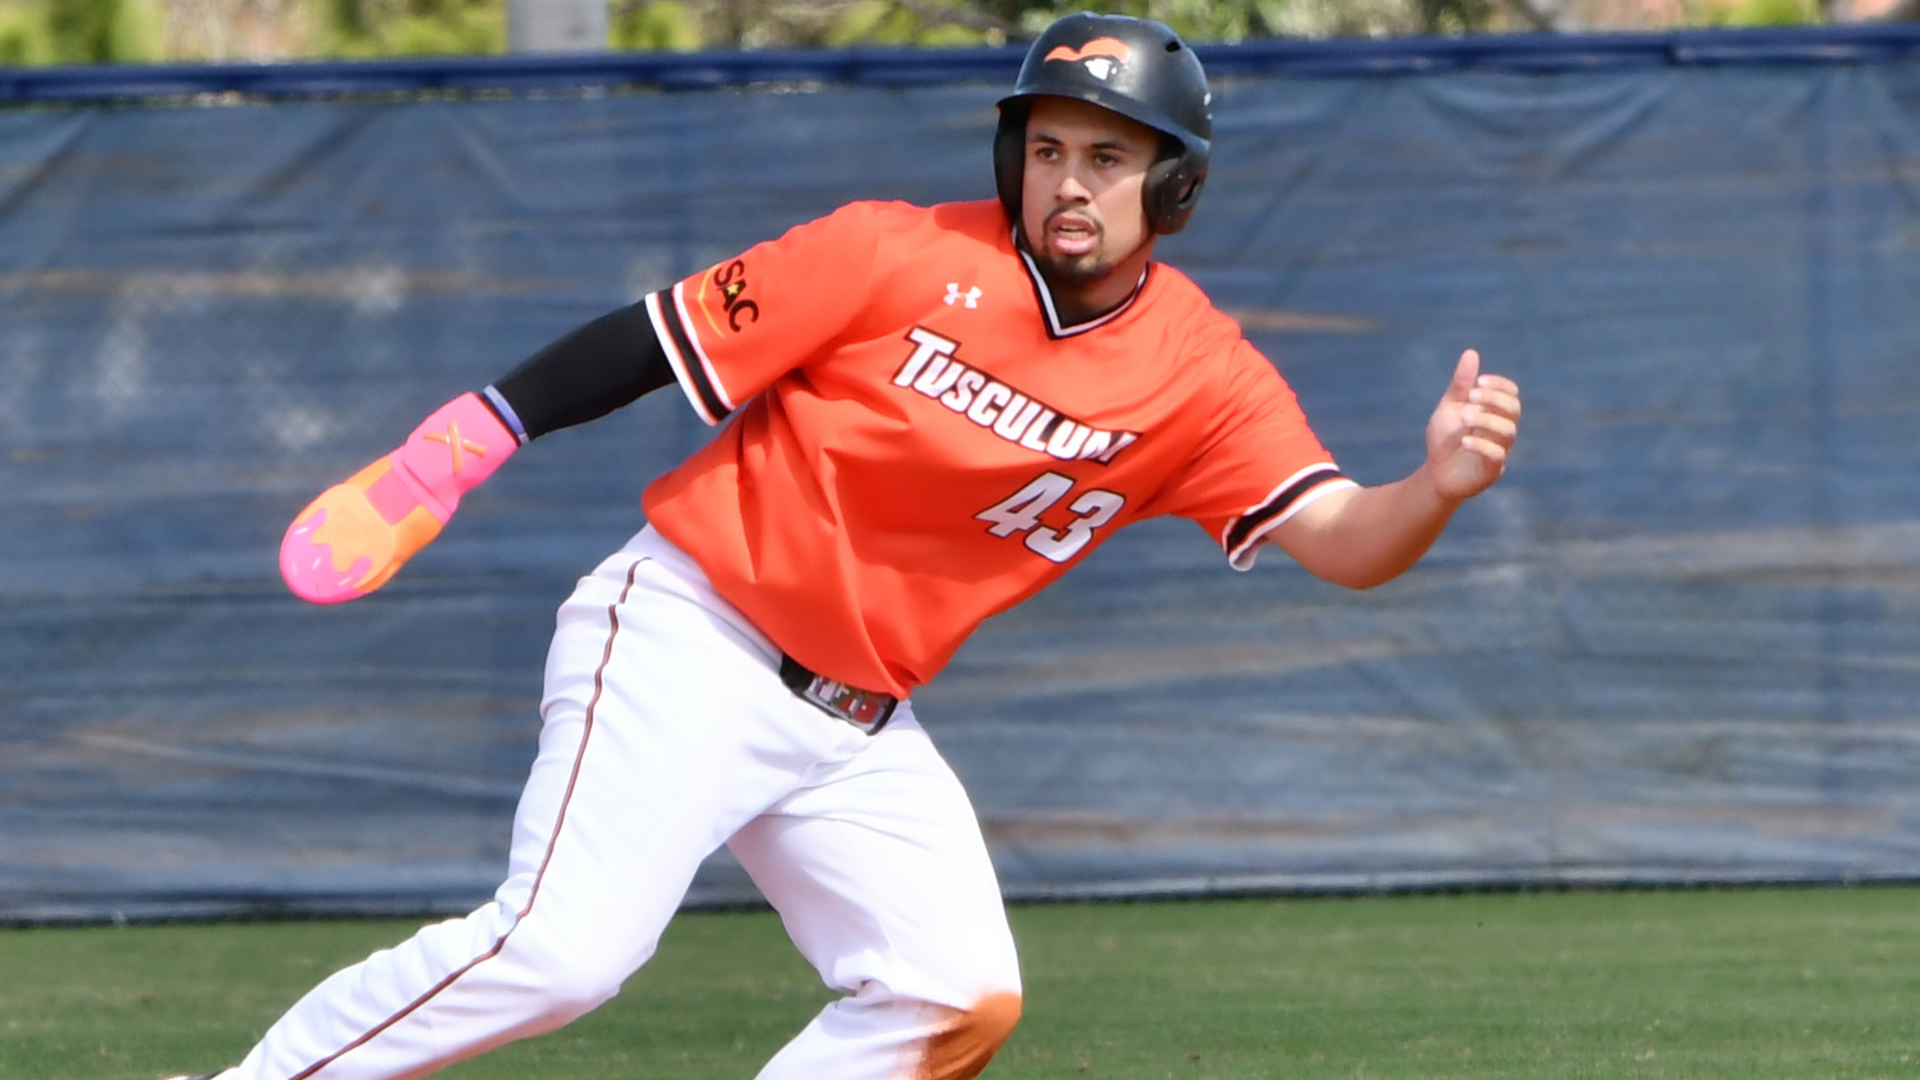 Jayden Strickland belted his first Tusculum home run in Saturday's win over Wingate.